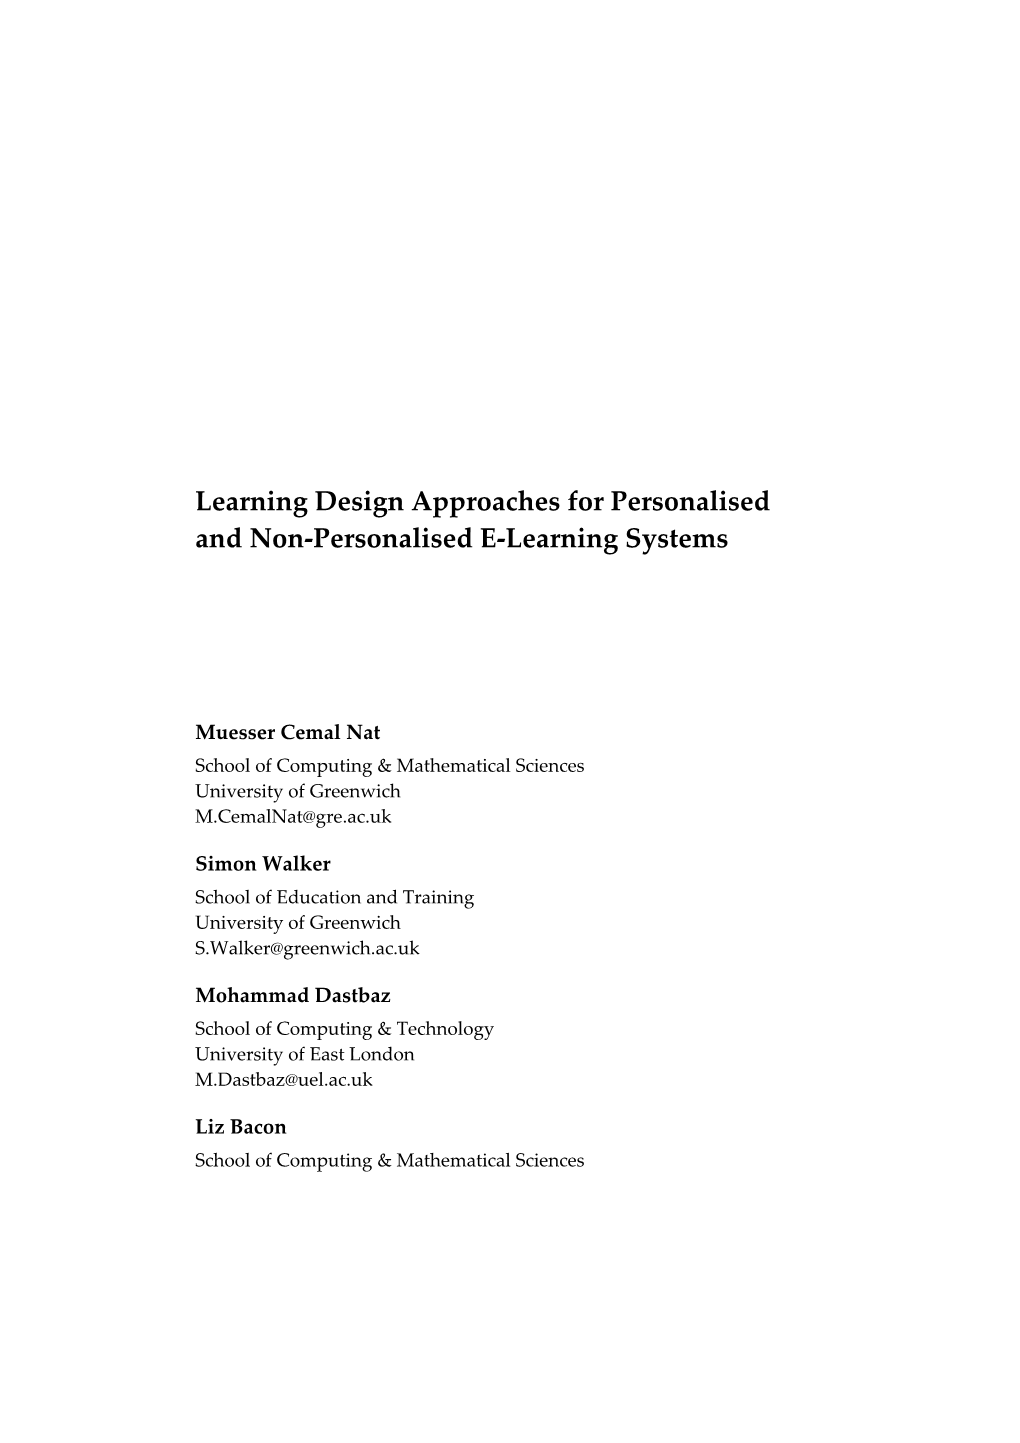 Learning Design Approaches for Personalised and Non-Personalised E-Learning Systems